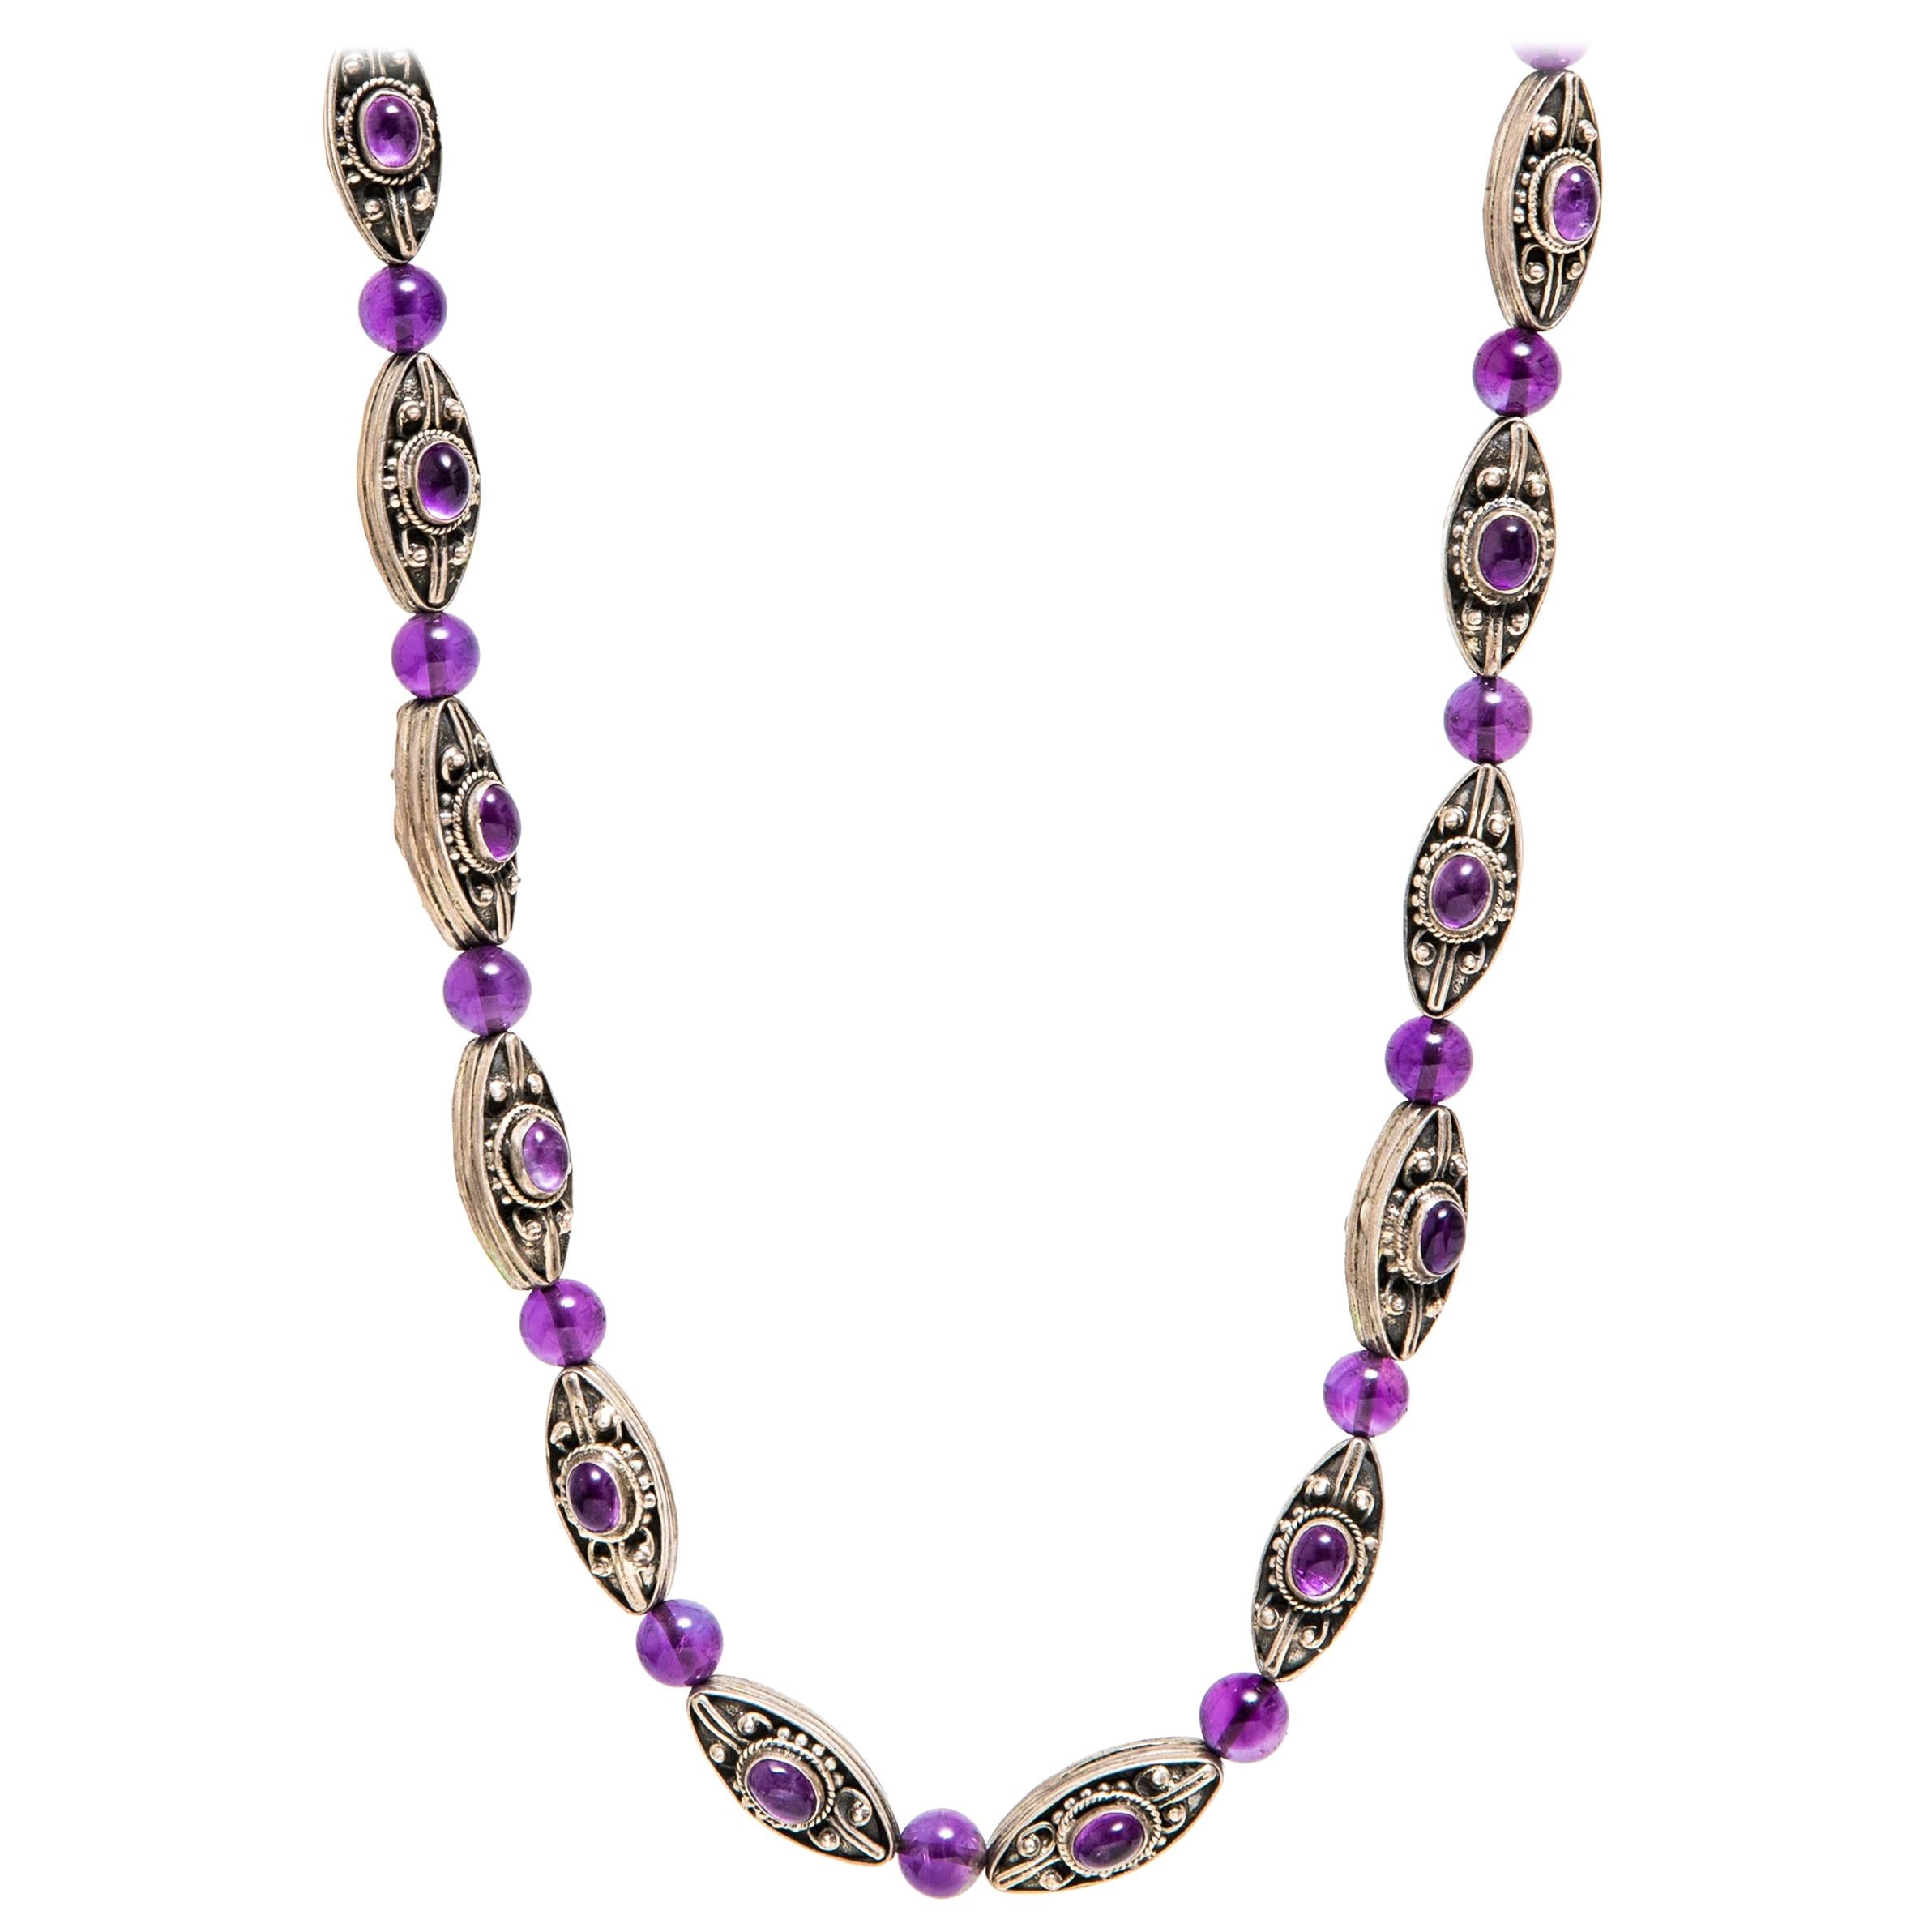 Silver and Amethyst Oval Cabochon and Beads Necklace